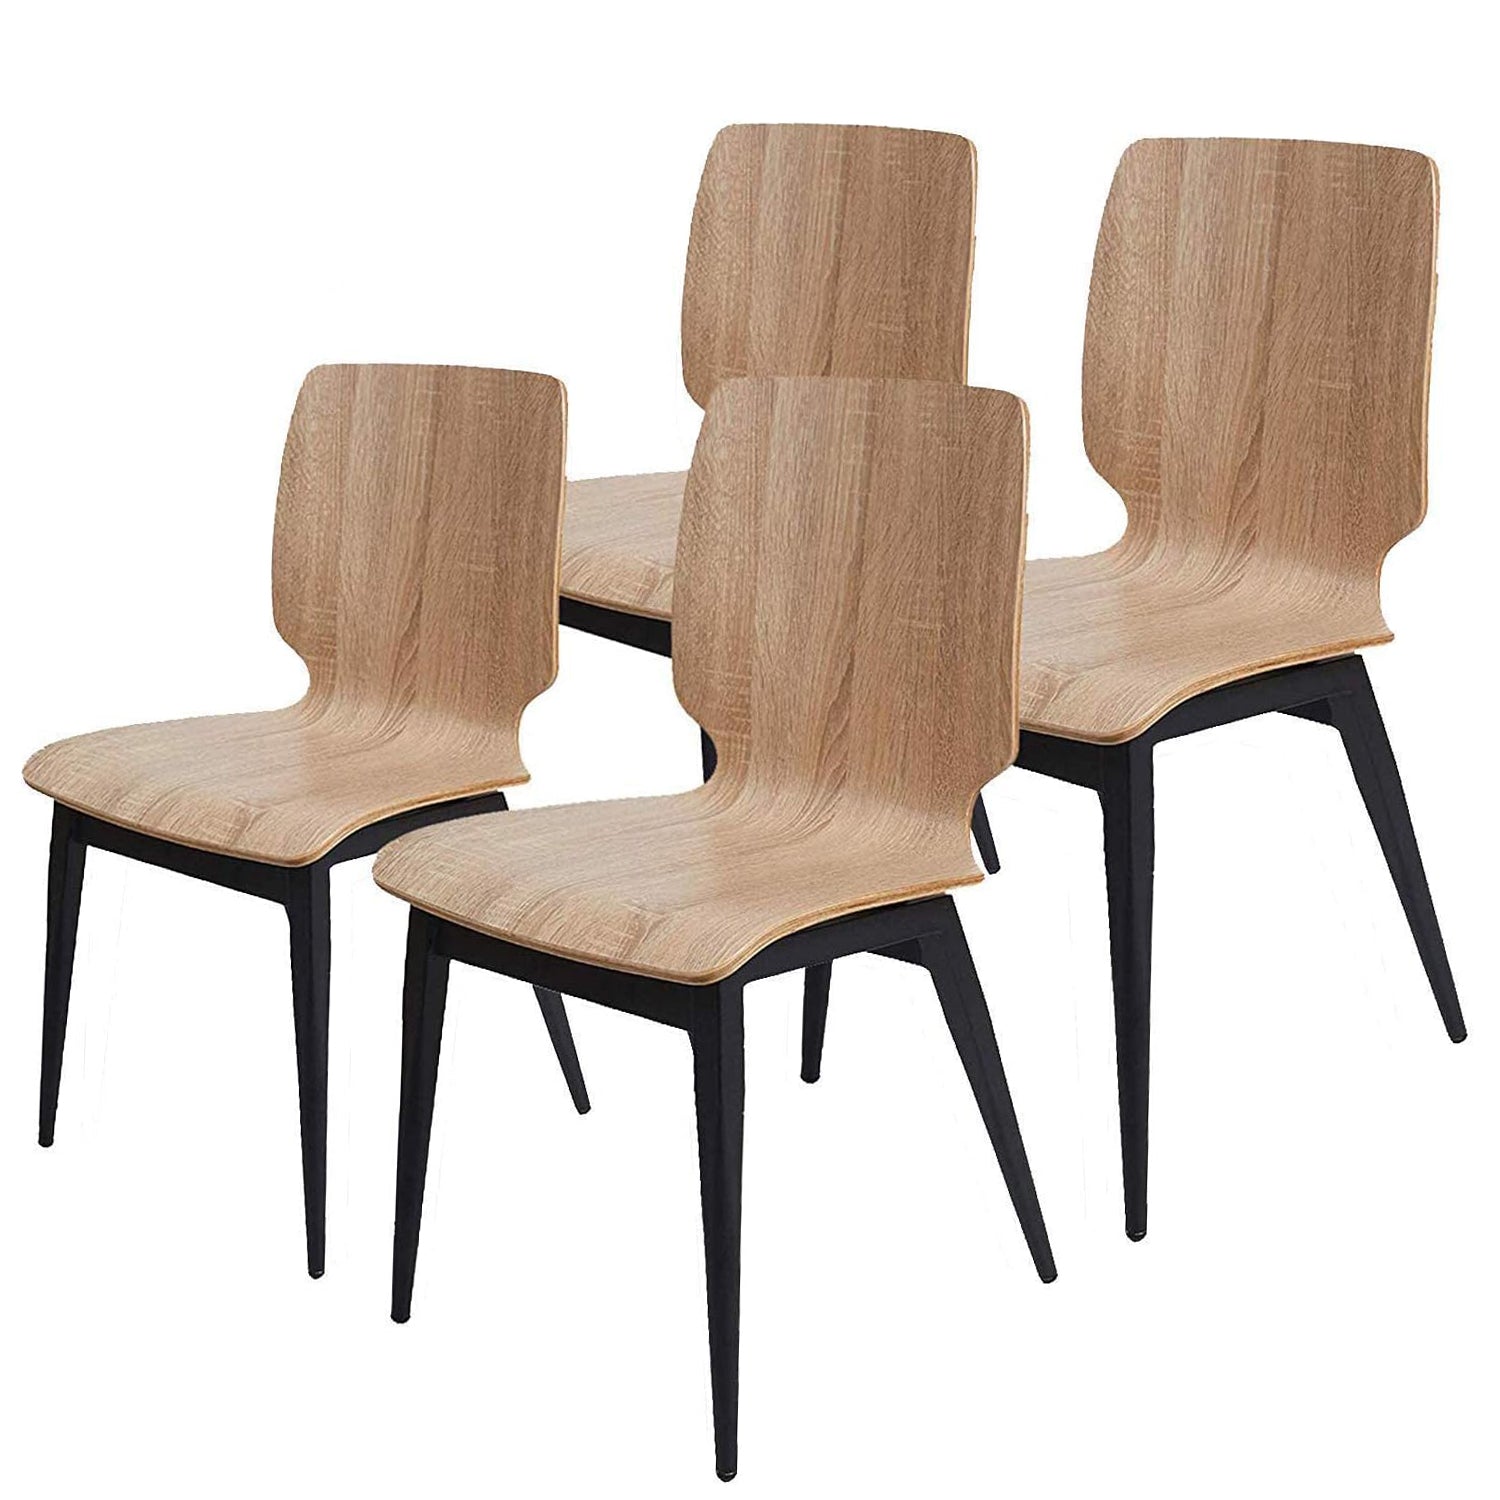 Set of 4 Modern Kitchen Chairs with Wooden Seats Metal Legs Dining Side Chair, Light Brown Curved Edge